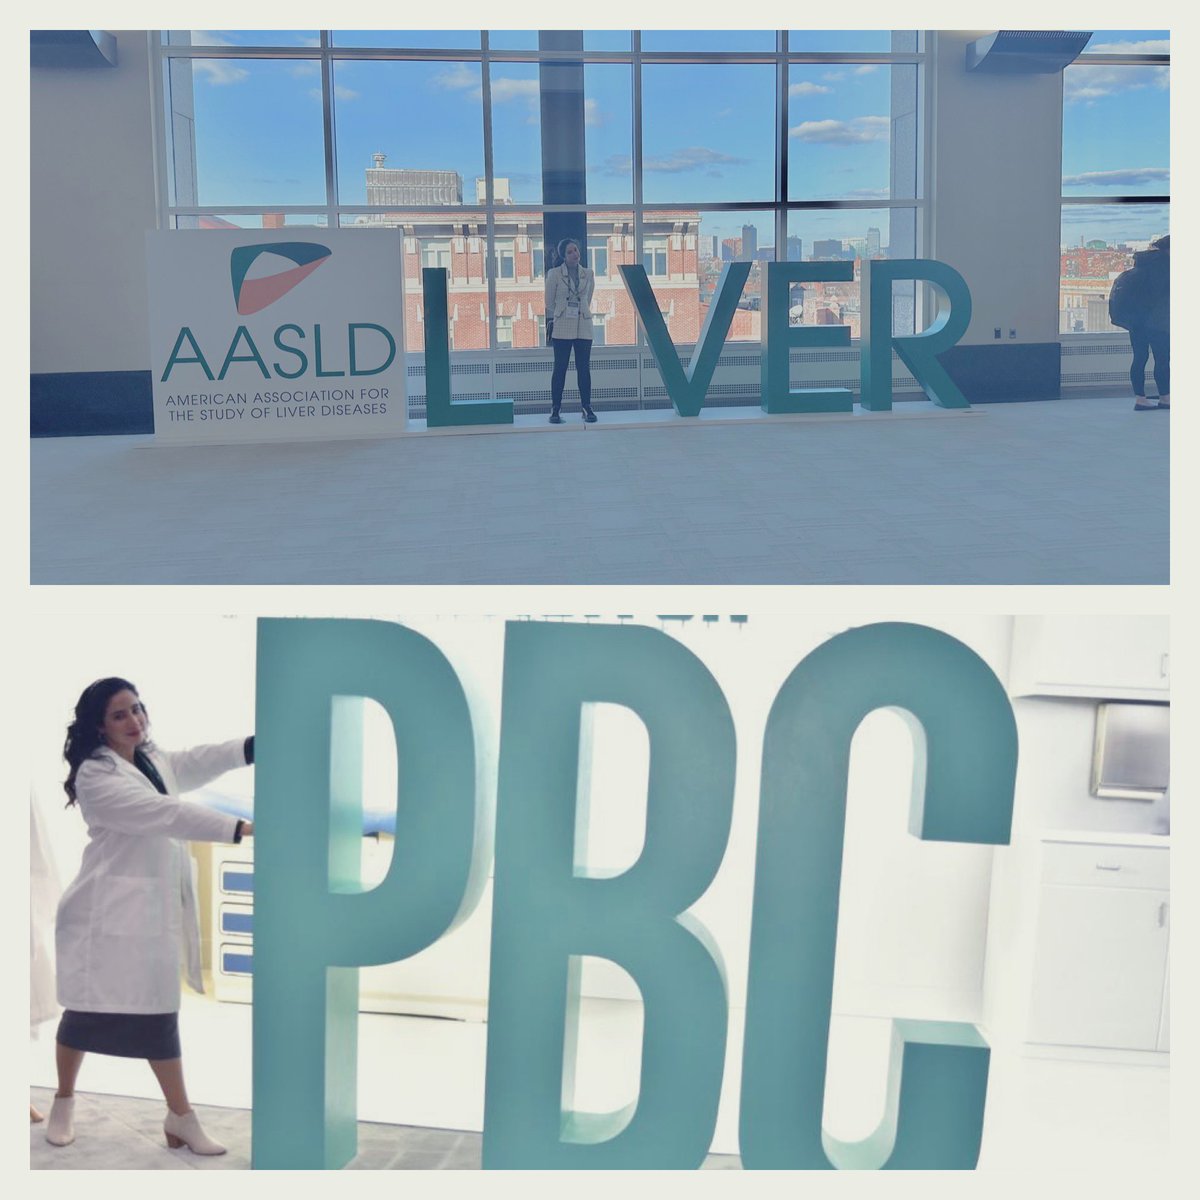 I had an absolute blast at #TLM2023 by @AASLDtweets filled with learning from🌟leaders in the field, 🤝 with old friends, making new connections, and exploring Boston for the first time🥶🏒 #GITwitter #MedTwitter #LiverLove #WomeninGI #PushBackonPBC